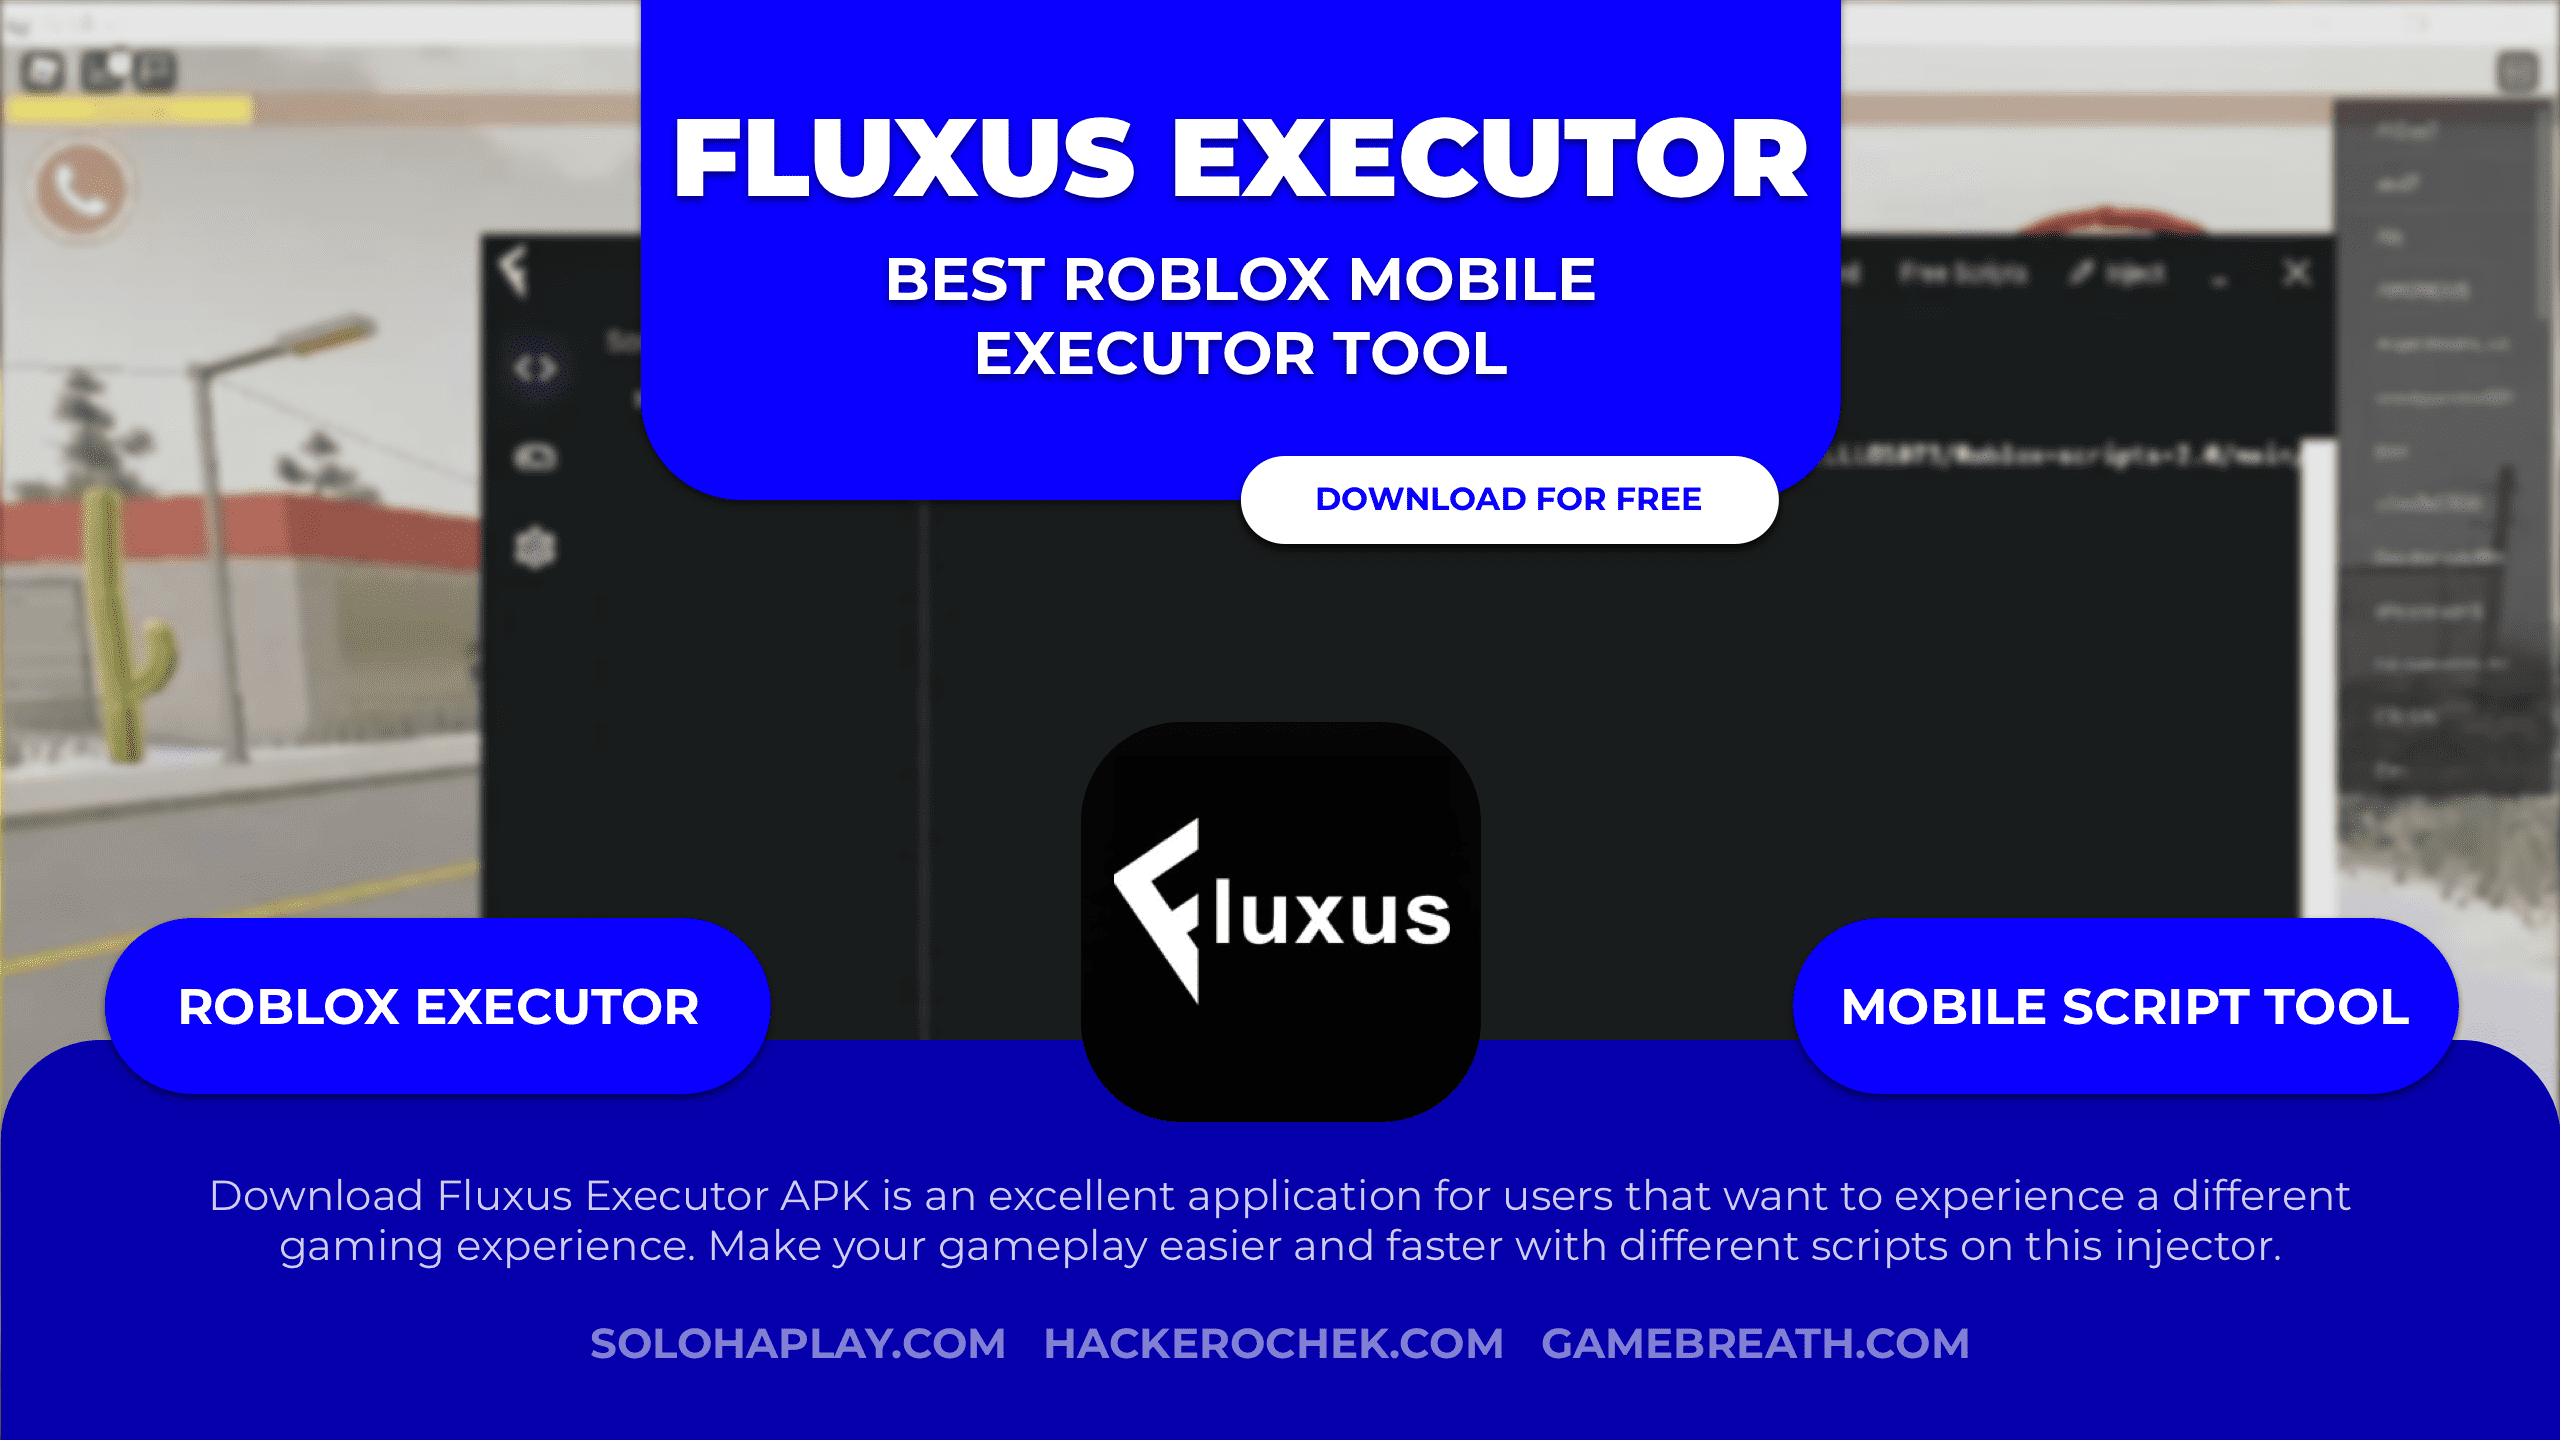 PC] Download Fluxus Executor Roblox And Get Premium Account For Free